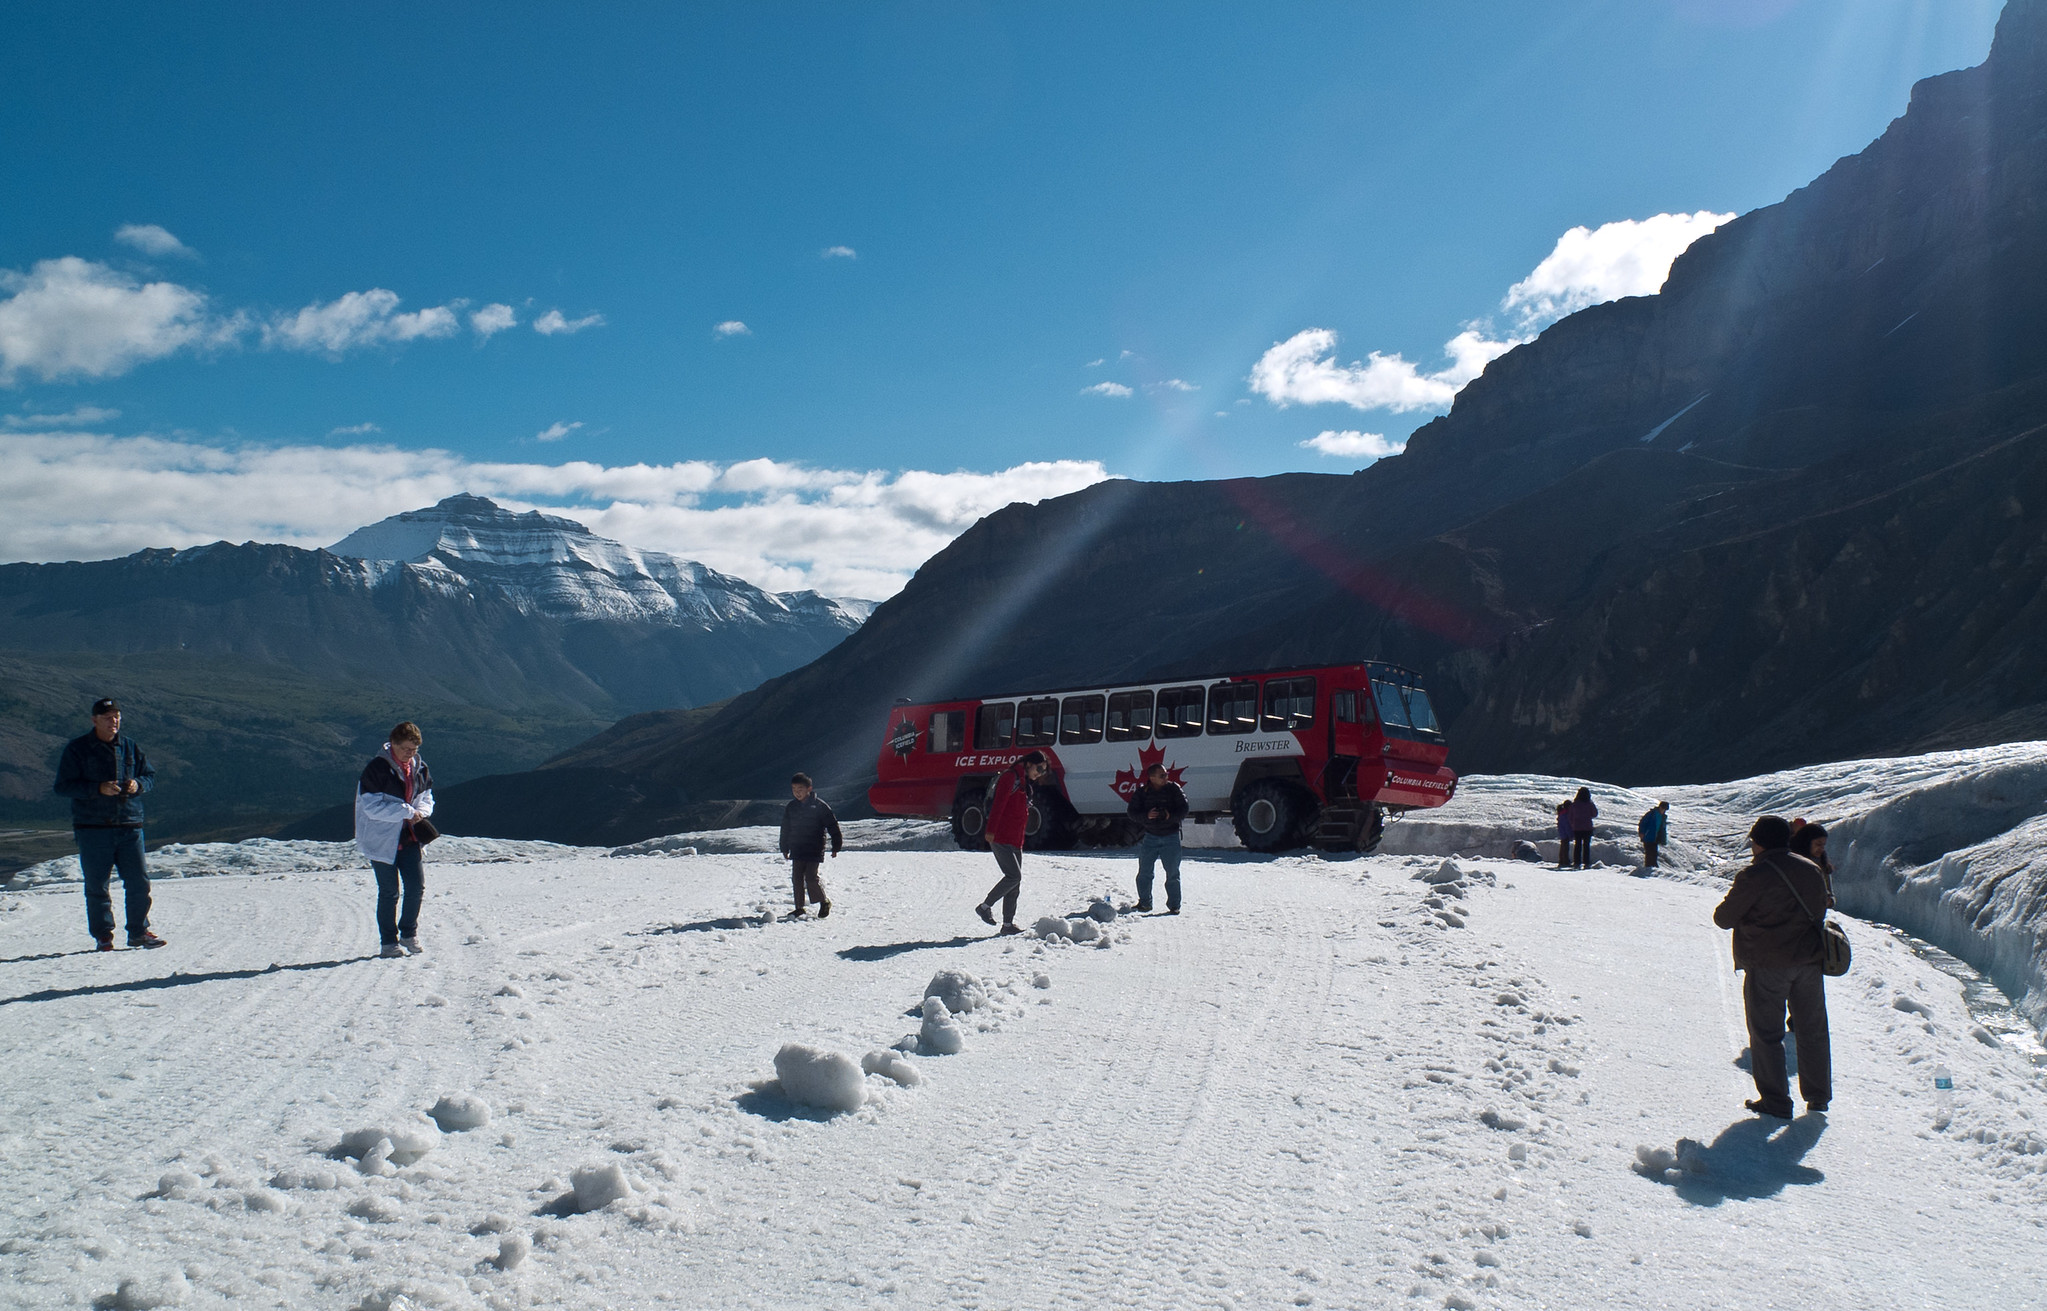 People walk across the snow in the mountains. A tour bus is parked behind them.